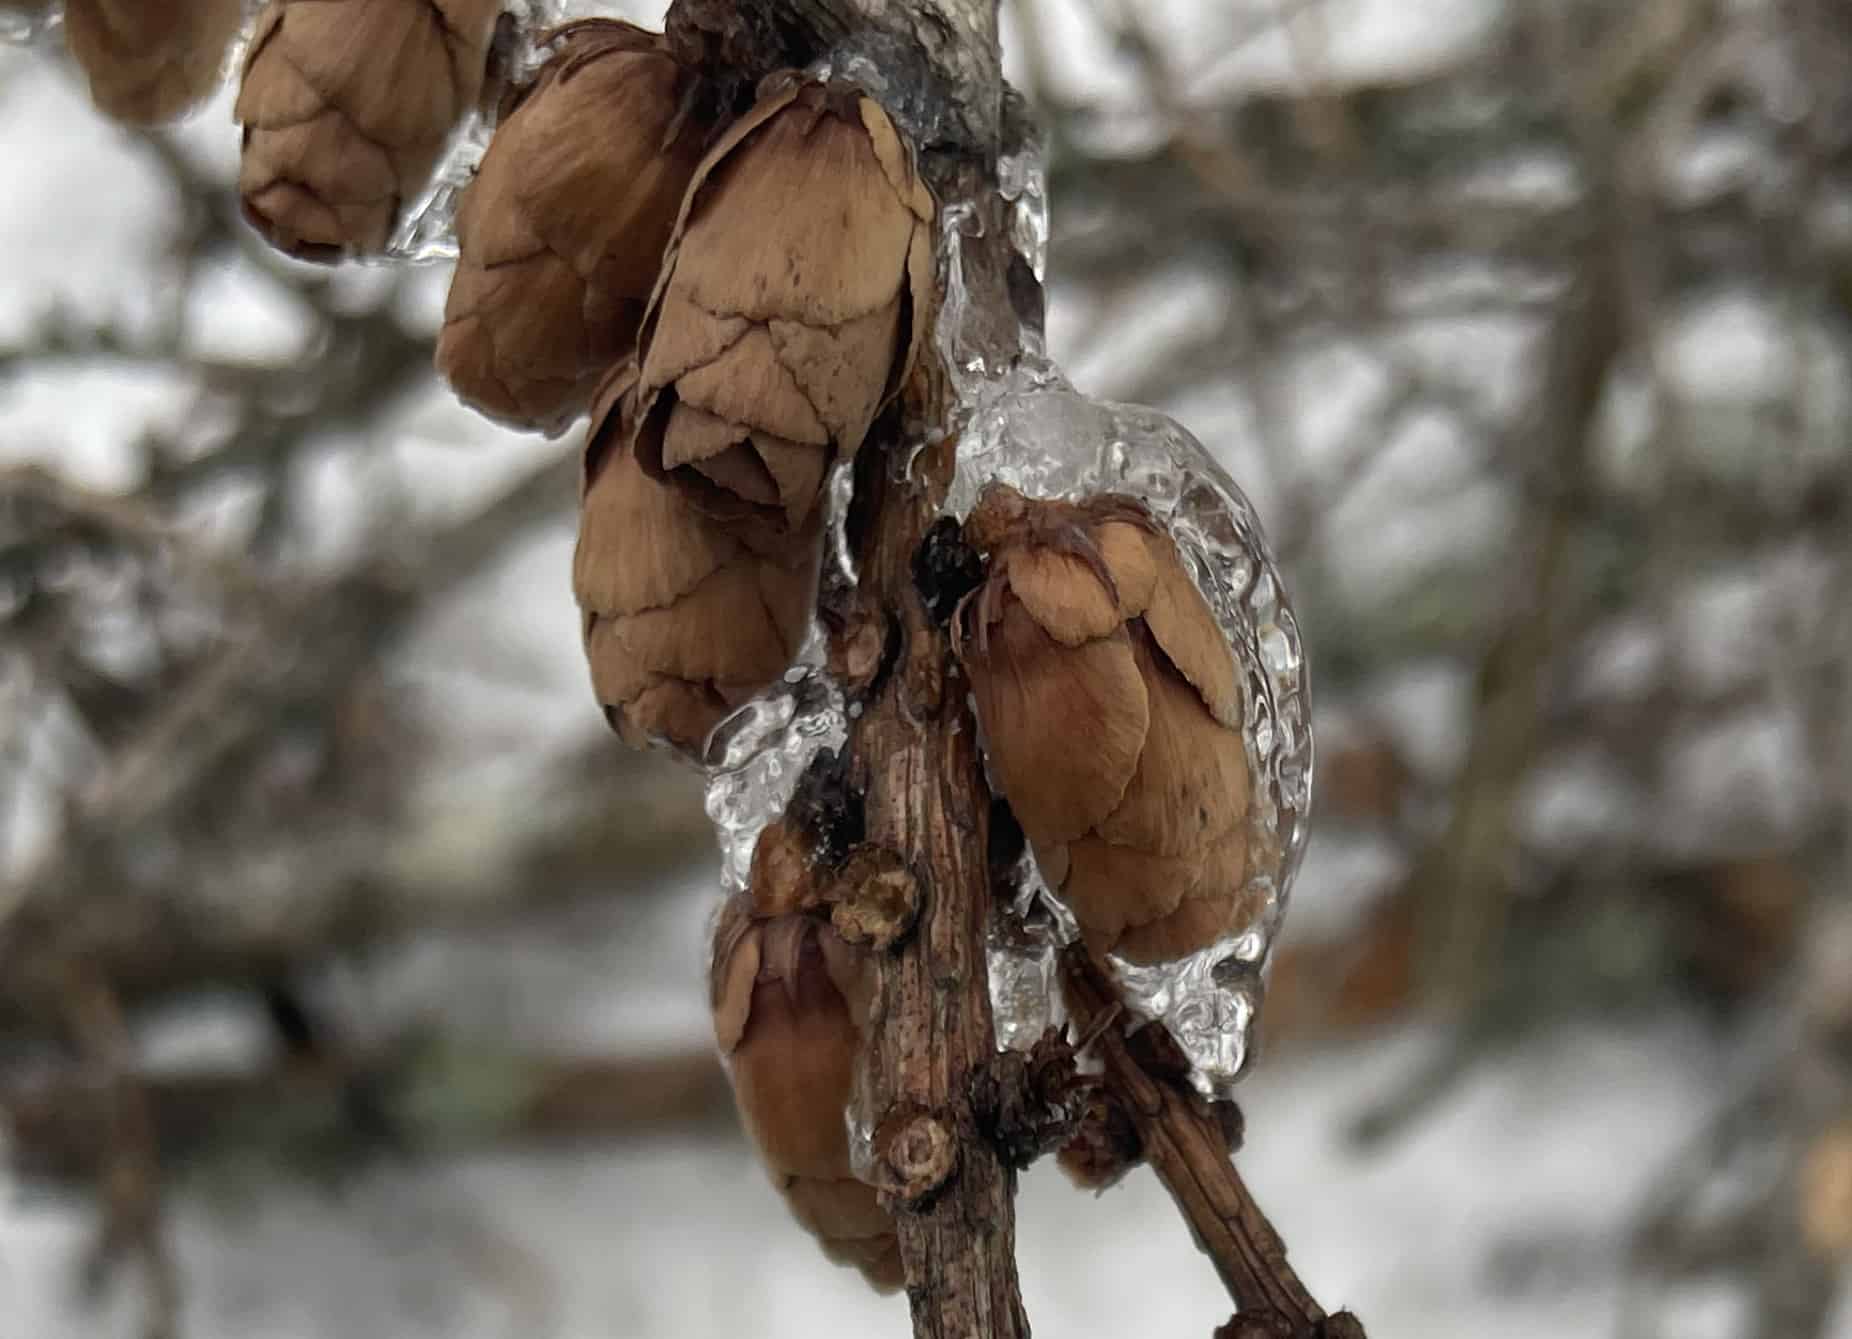 Cones of Tamarack (or hackmatack, or larch) show coppery under the ice at Tamarack Hollow.